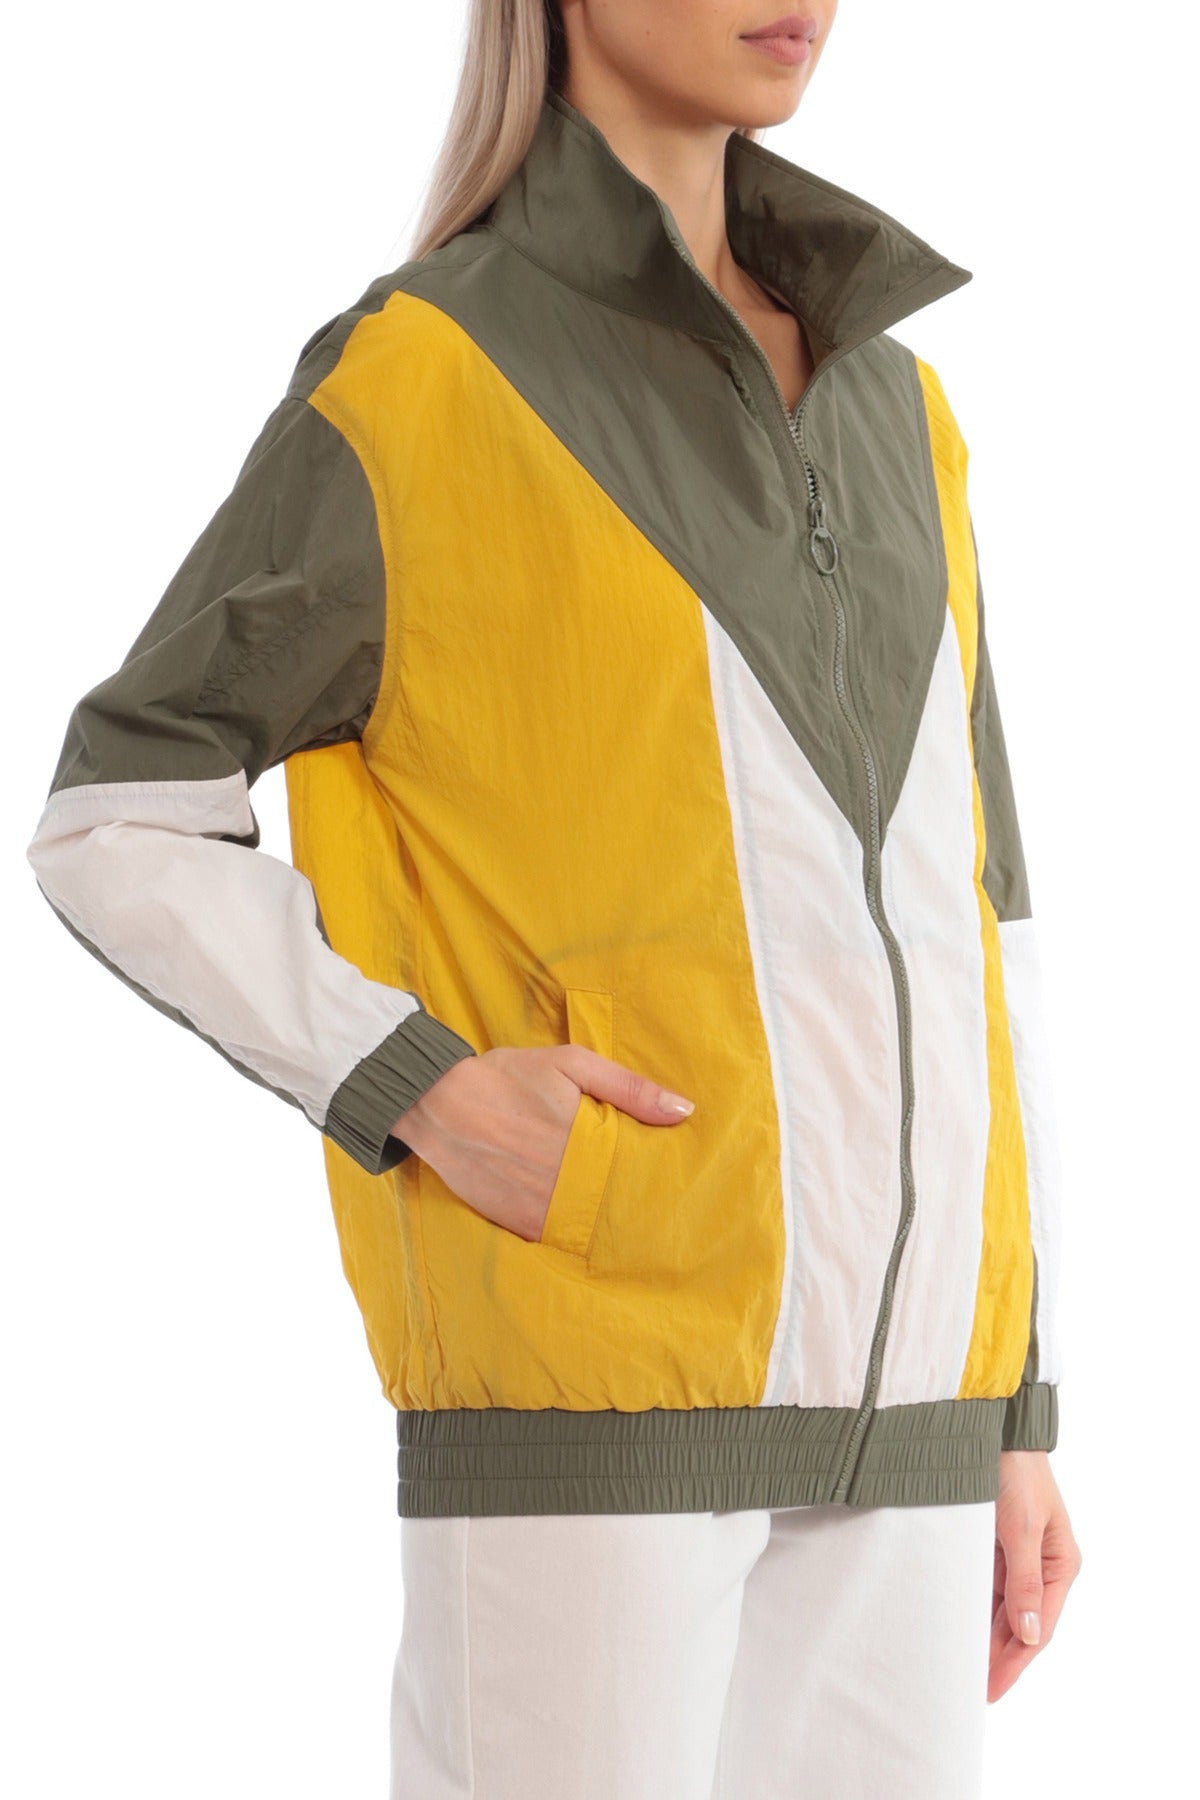 Colorblock Nylon Track Jacket Outerwear Lightweight Olive Green Yellow White